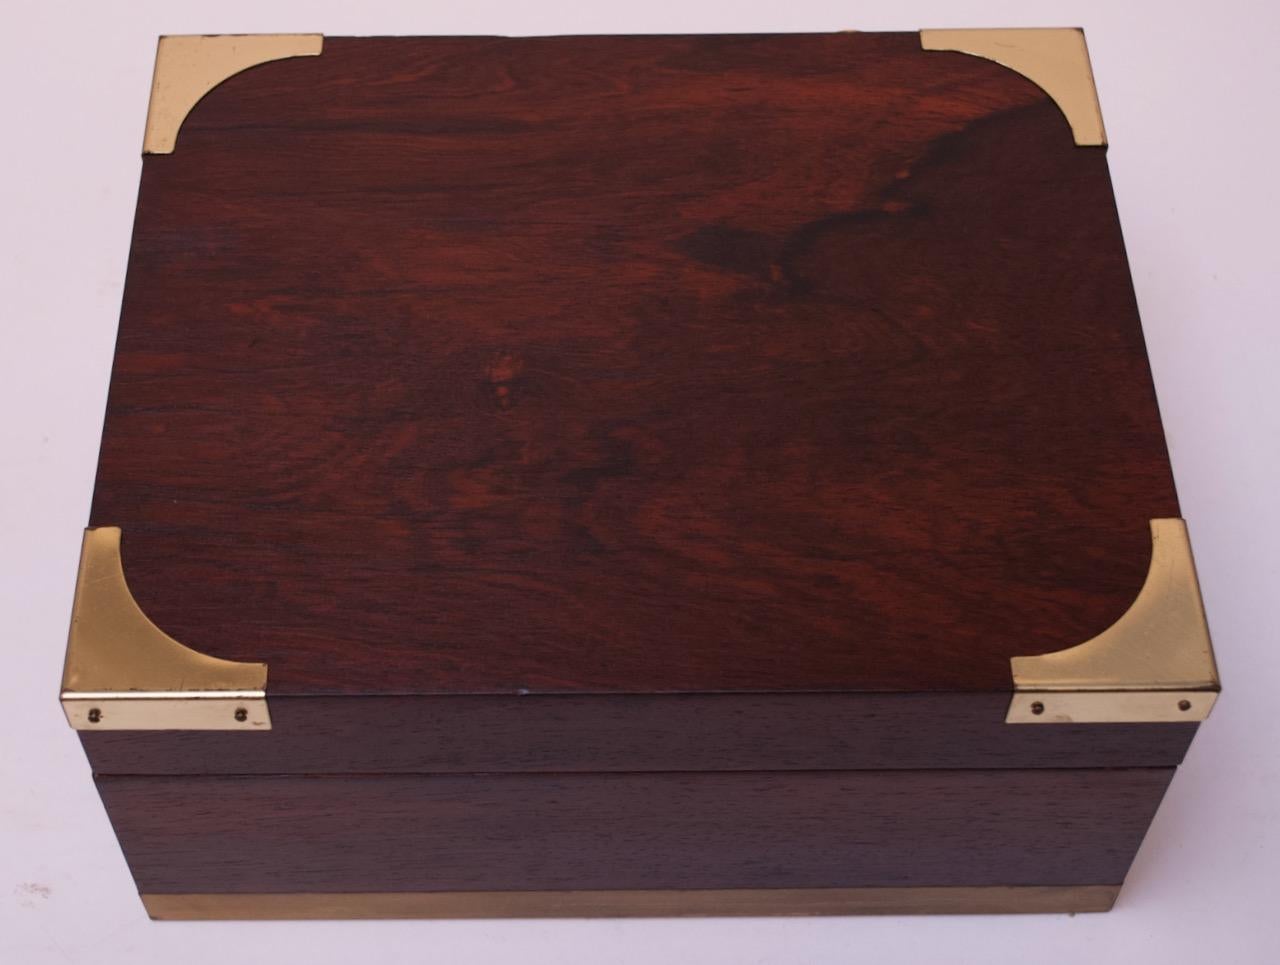 Elegant humidor veneered in rosewood with brass corner and hinged detail. Interior is solid Spanish Cedar, the ideal wood for cigar storage, as it is not prone to warping, can repel tobacco beetles, and holds more moisture than most woods, allowing